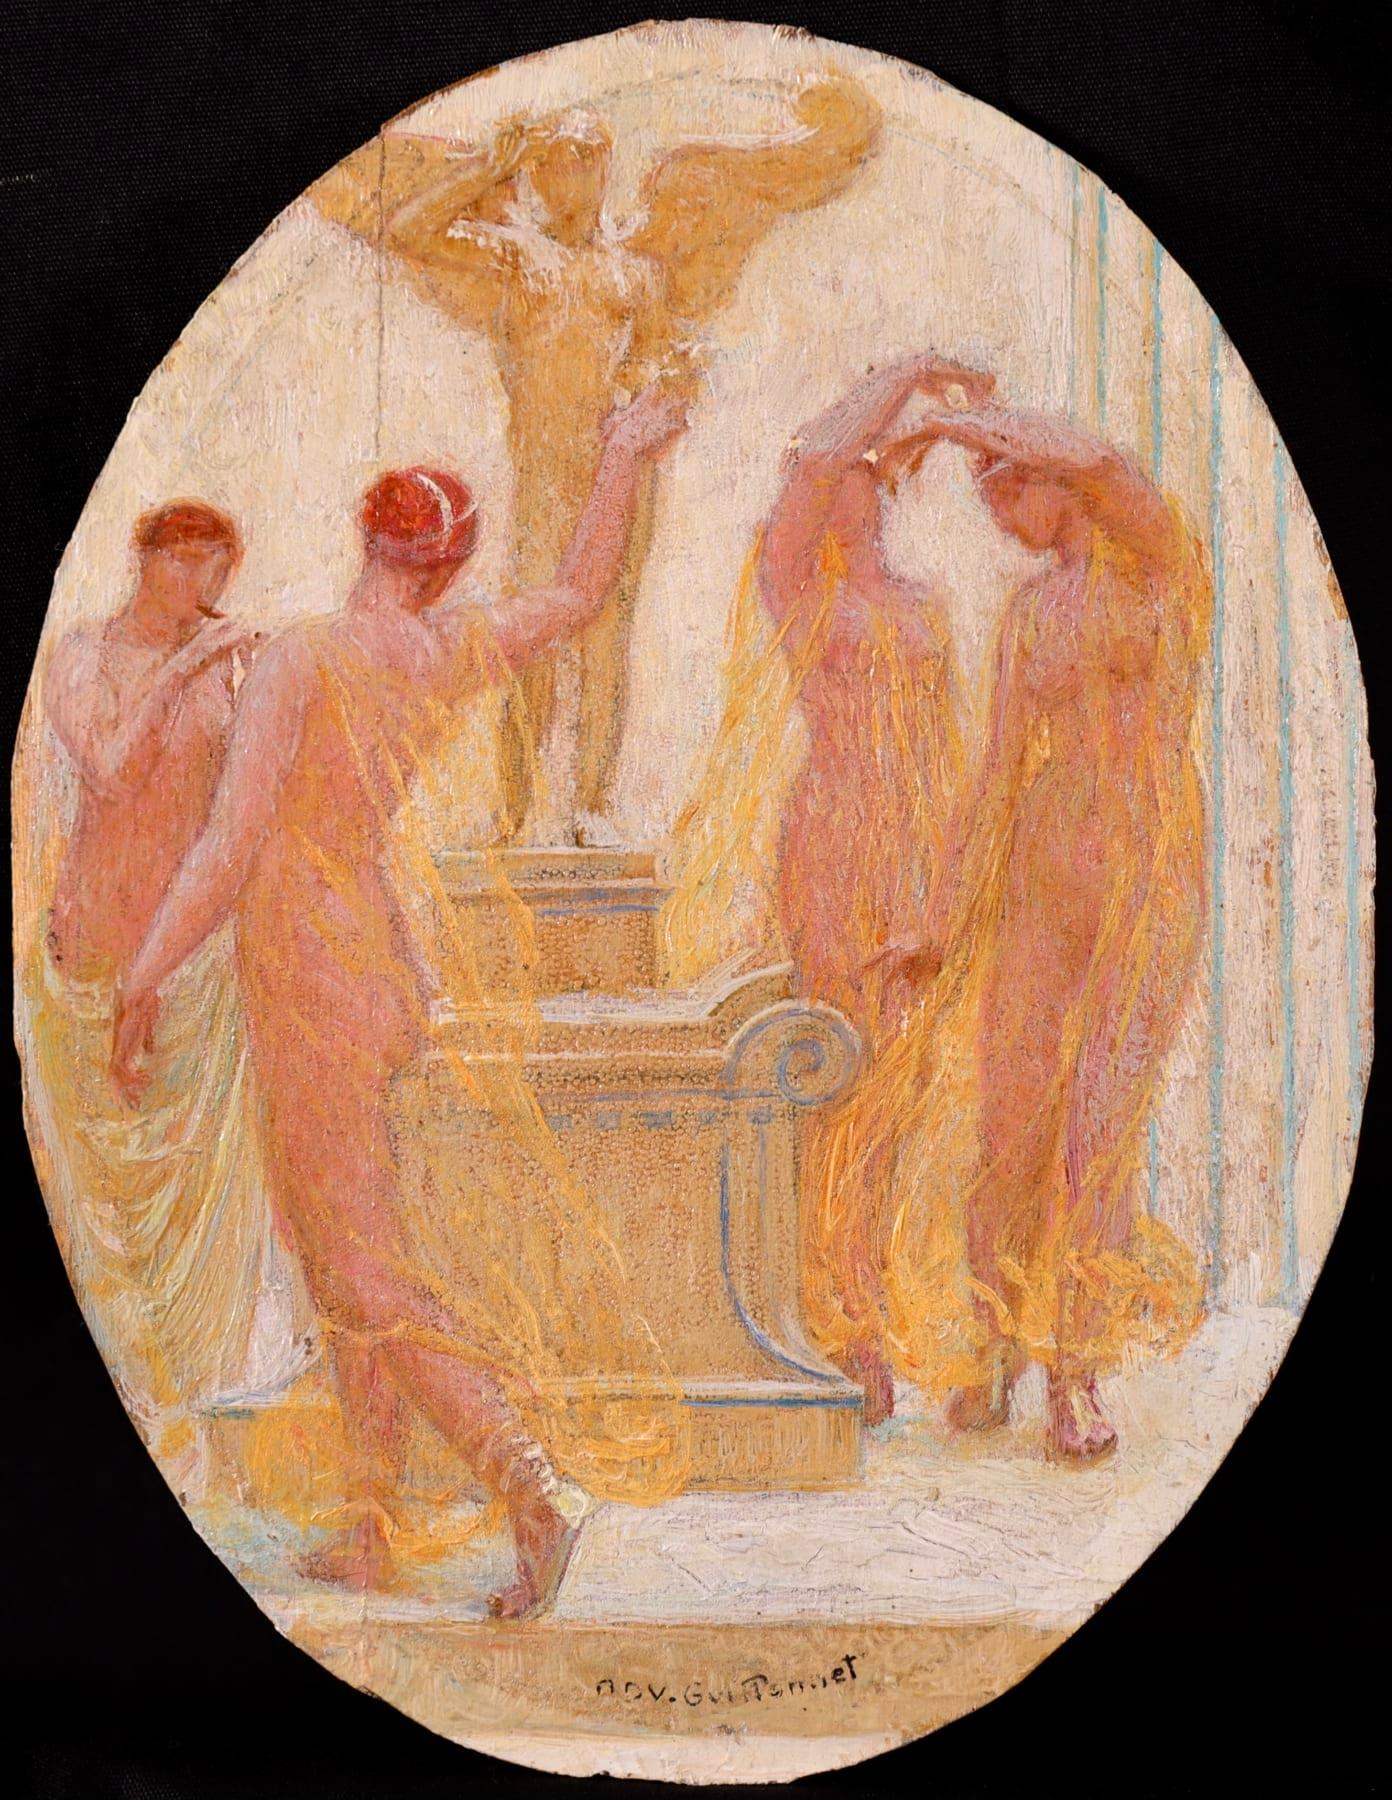 Dancing Nymphs - Post Impressionist Oil, Figures Dancing by Octave Guillonnet 1